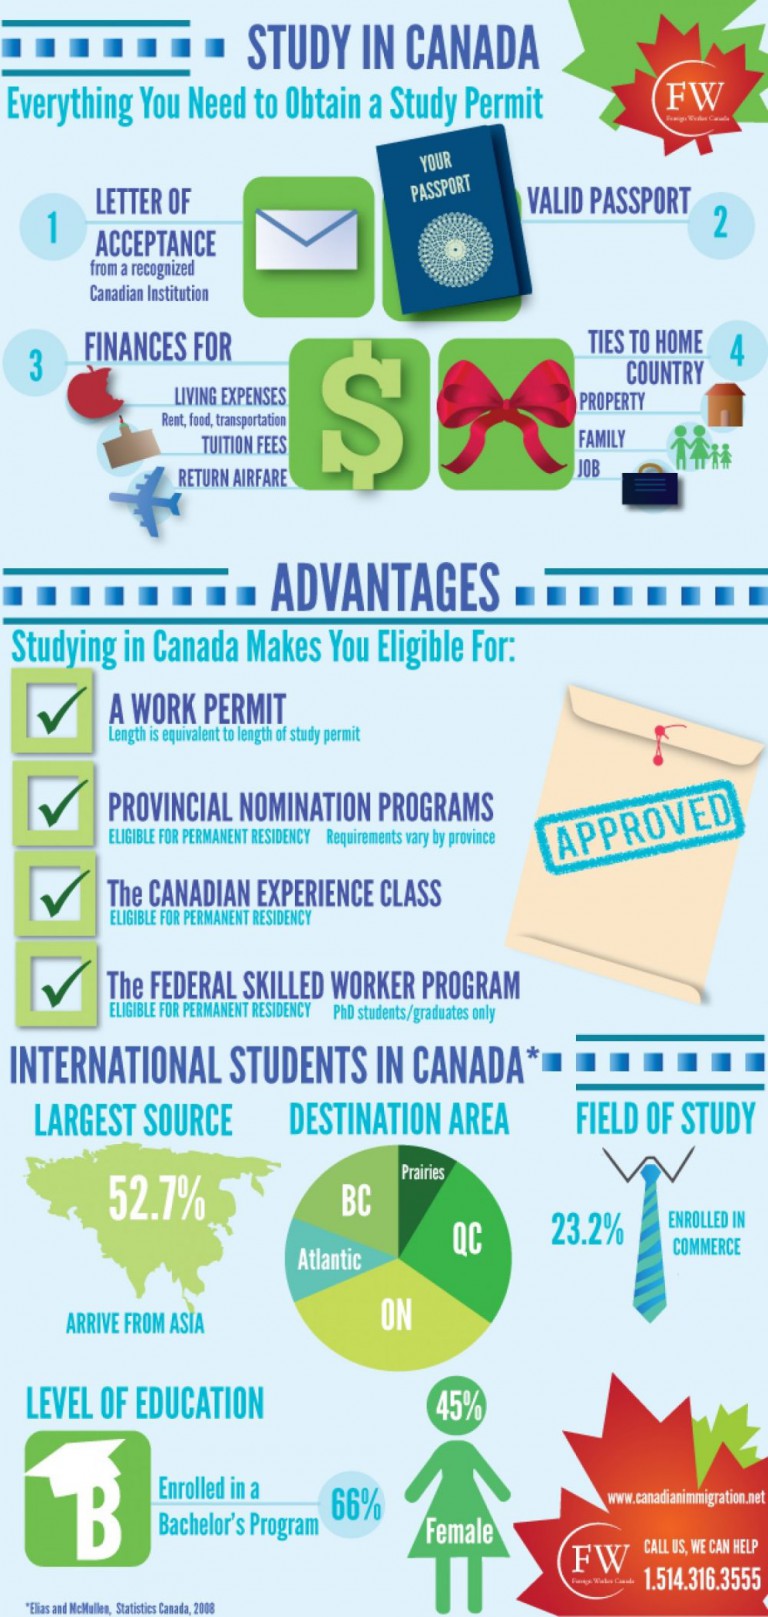 Everything You Need to Obtain a Study Permit in Canada